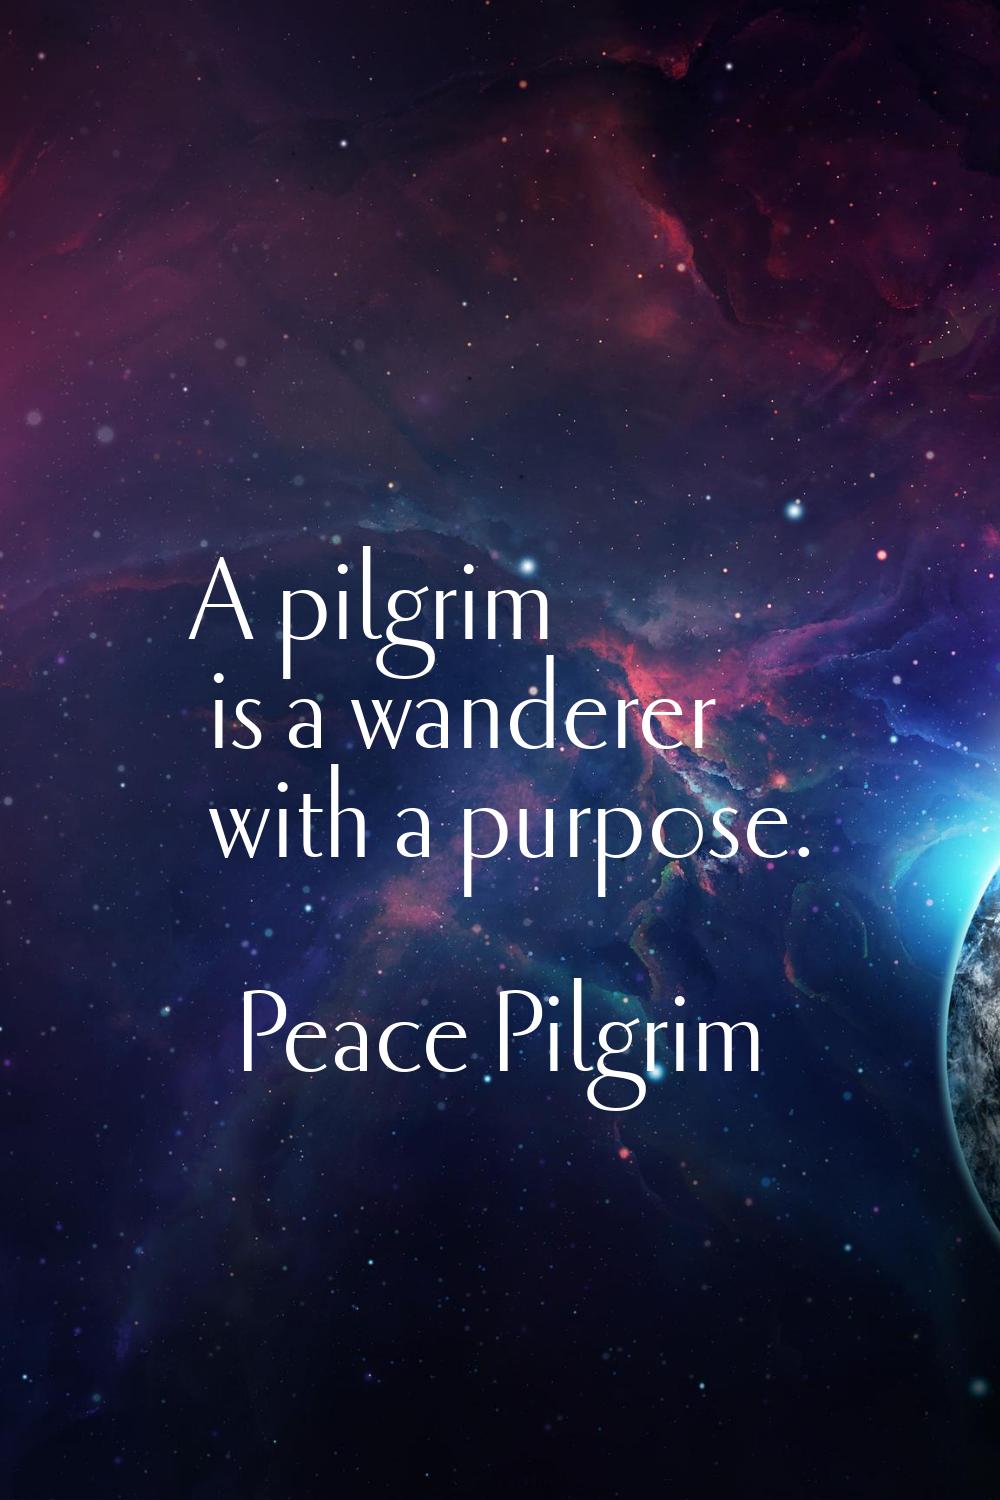 A pilgrim is a wanderer with a purpose.